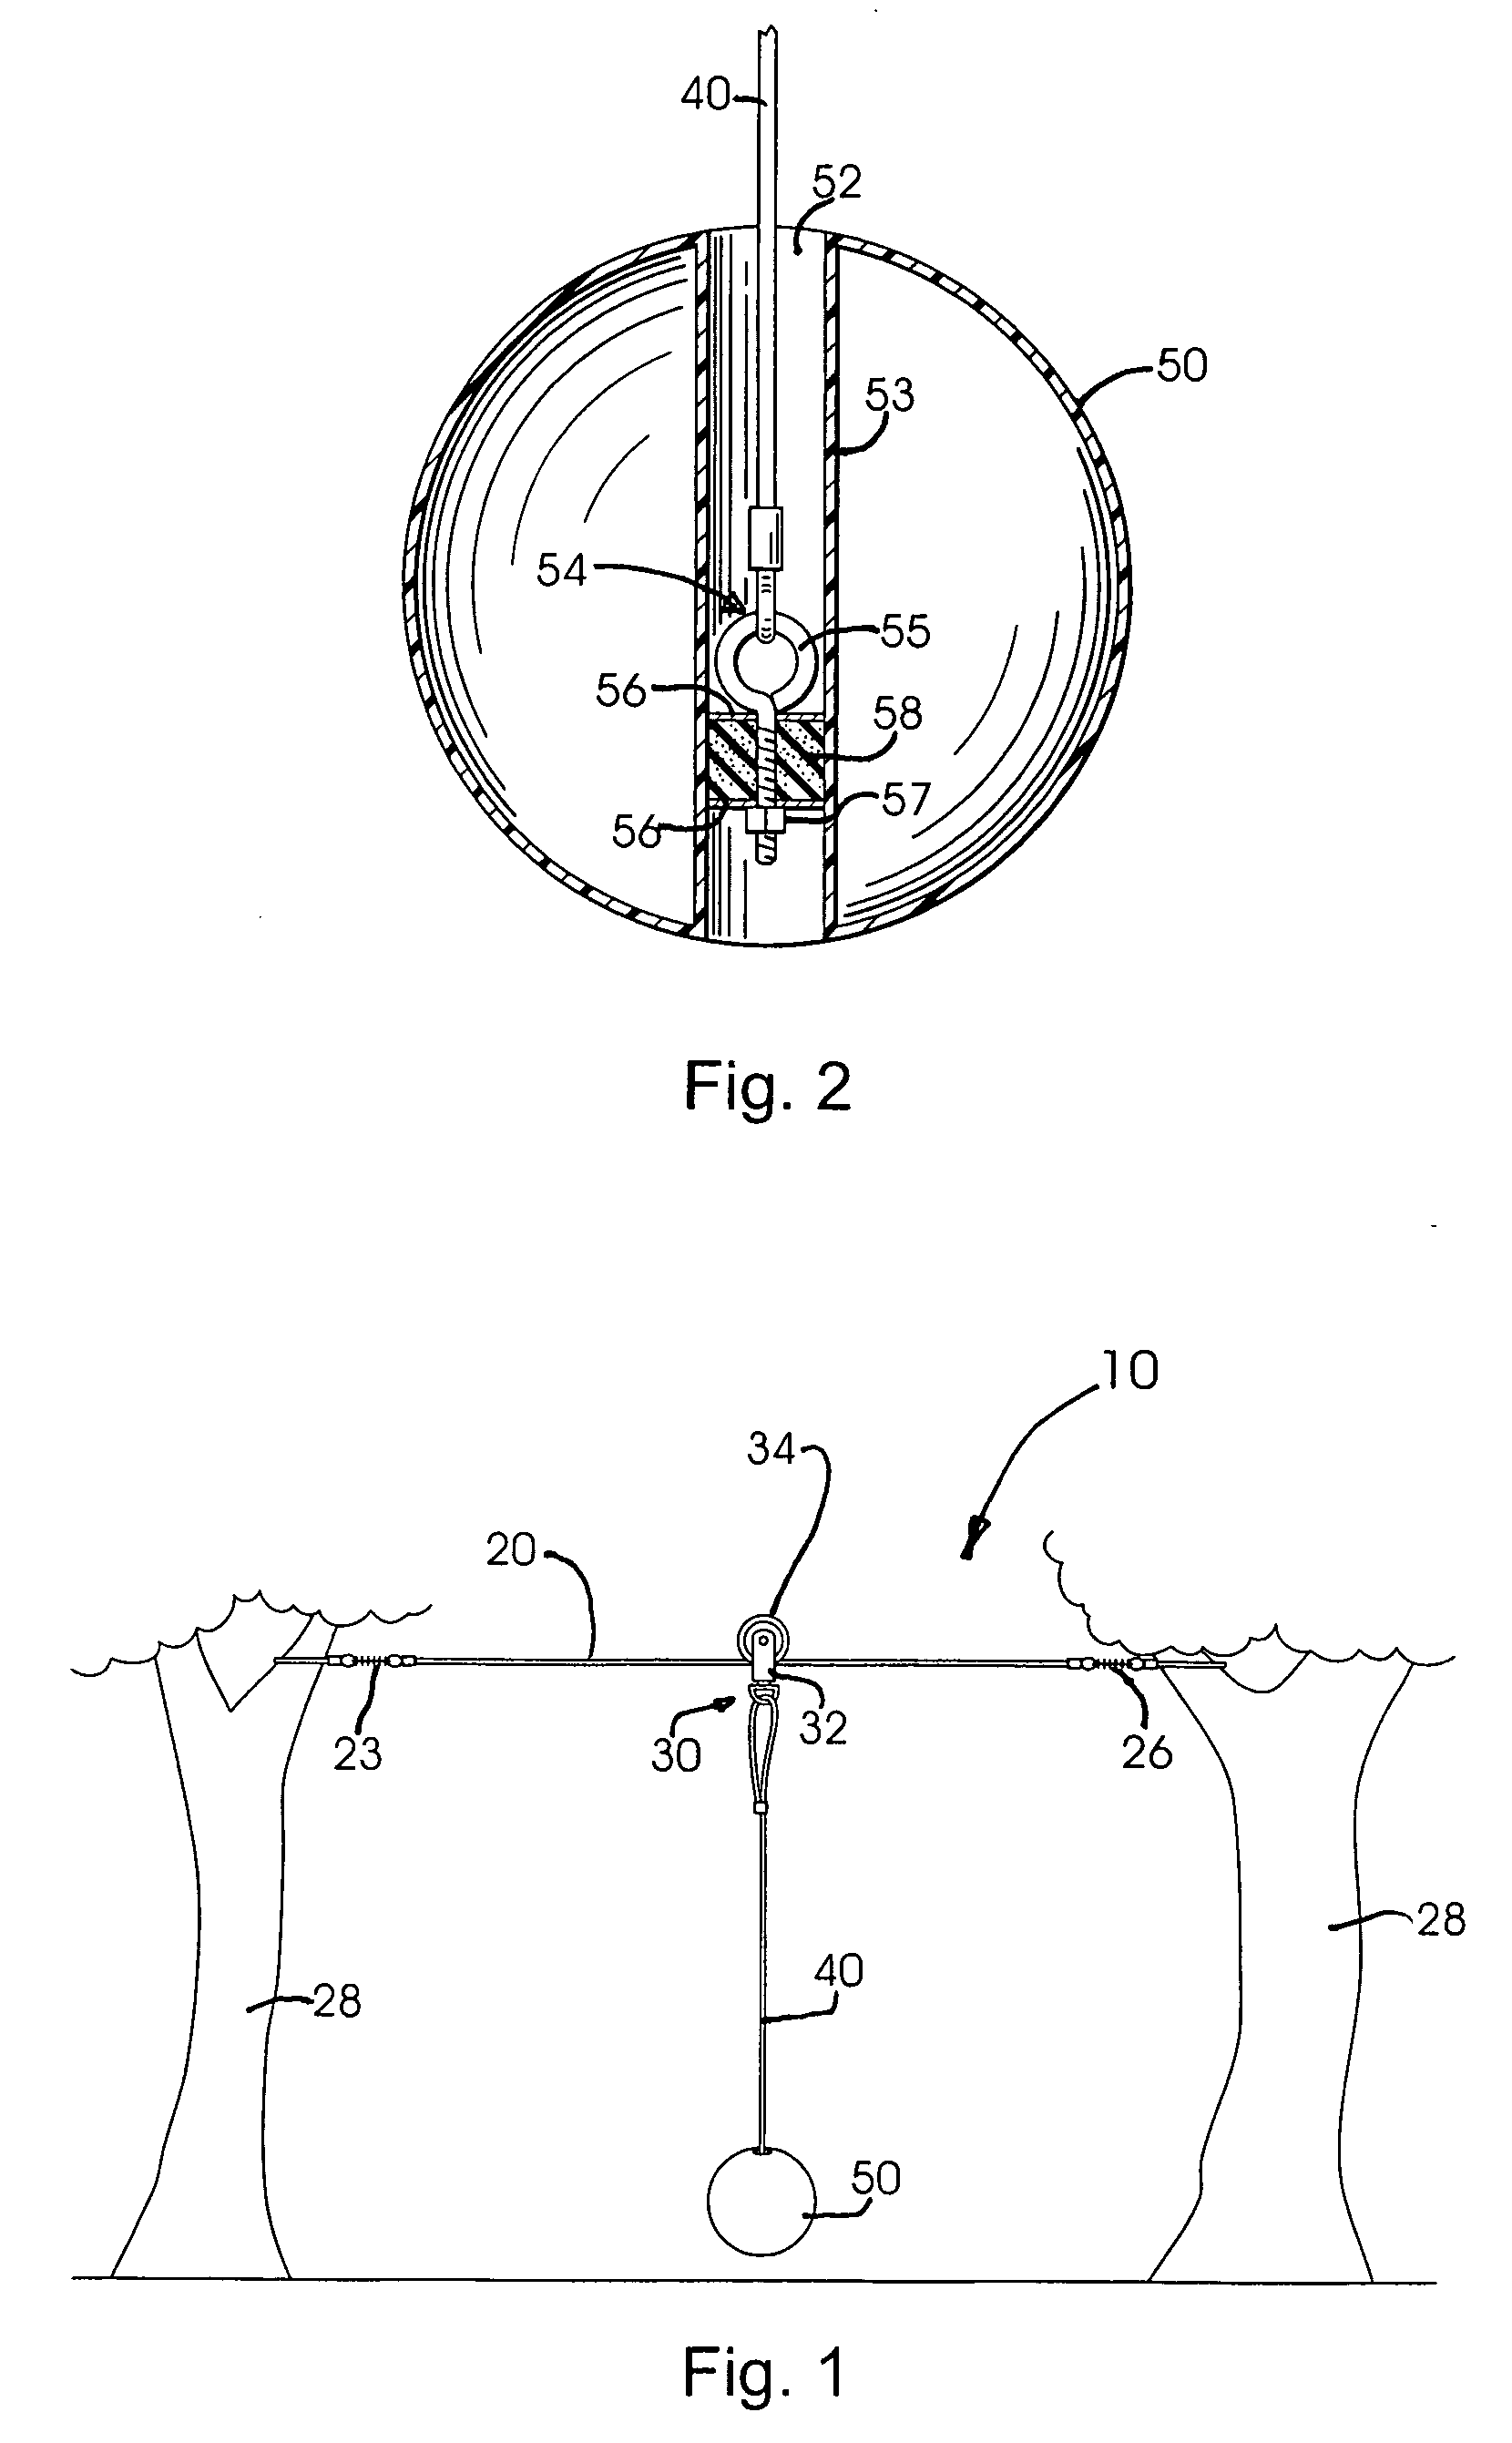 Tethered pet toy and method of use